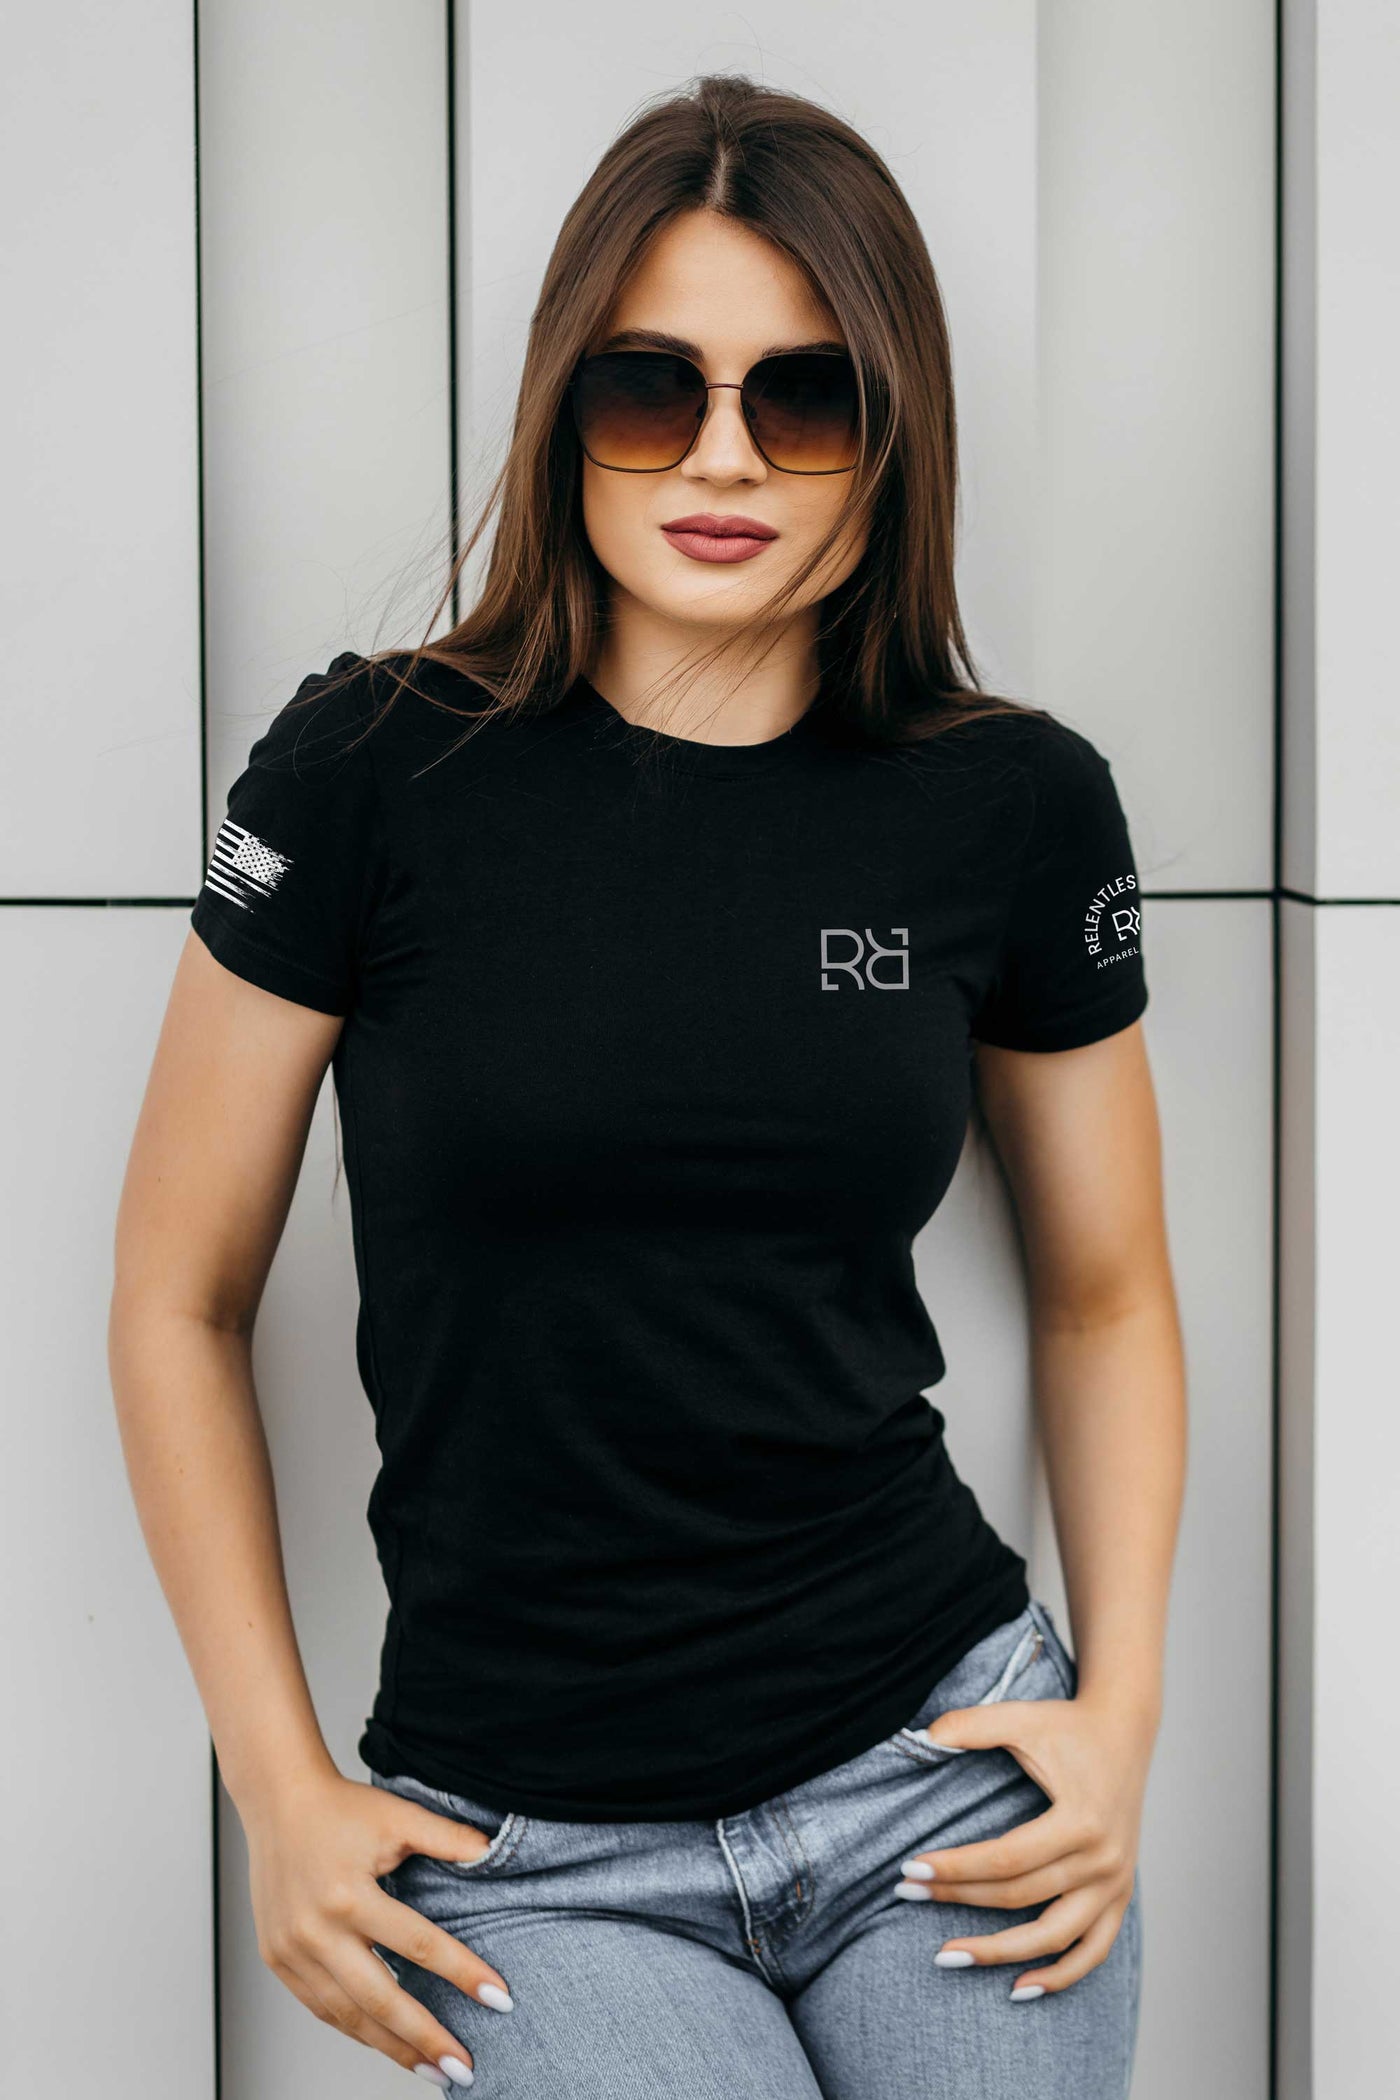 Stay Hungry Stay Humble | Premium Women's Tee